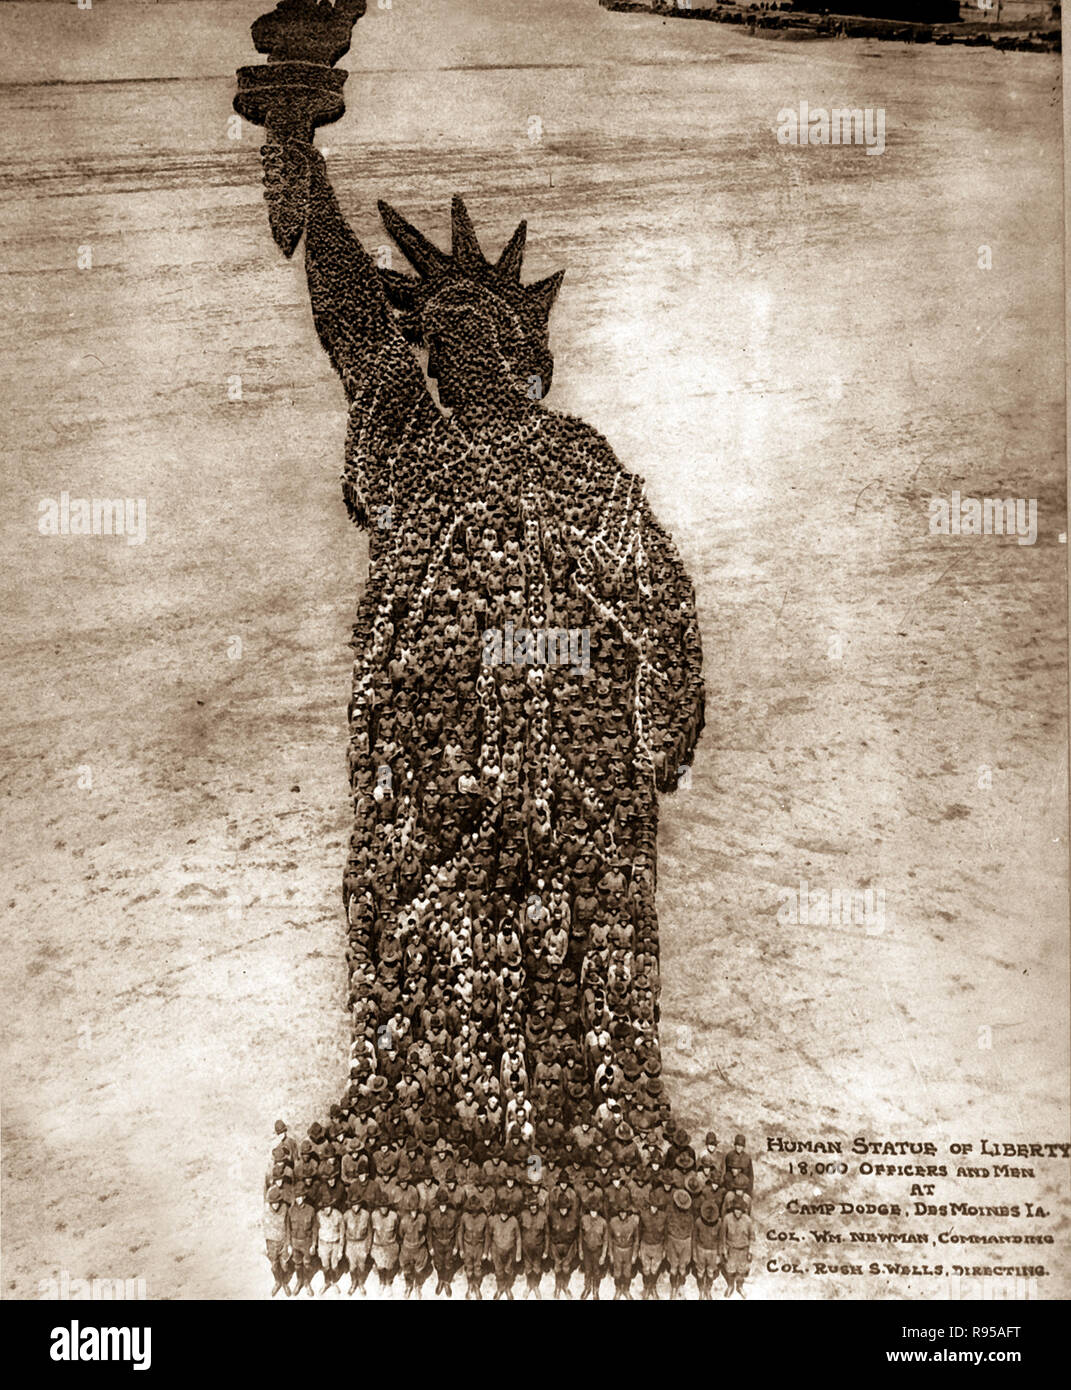 Human Statue of Liberty.  18,000 Officers and Men at Camp Dodge, Des Moines, Ia.  Col. Wm. Newman, Commanding. Col. Rush S. Wells, Directing. September 1918. Stock Photo